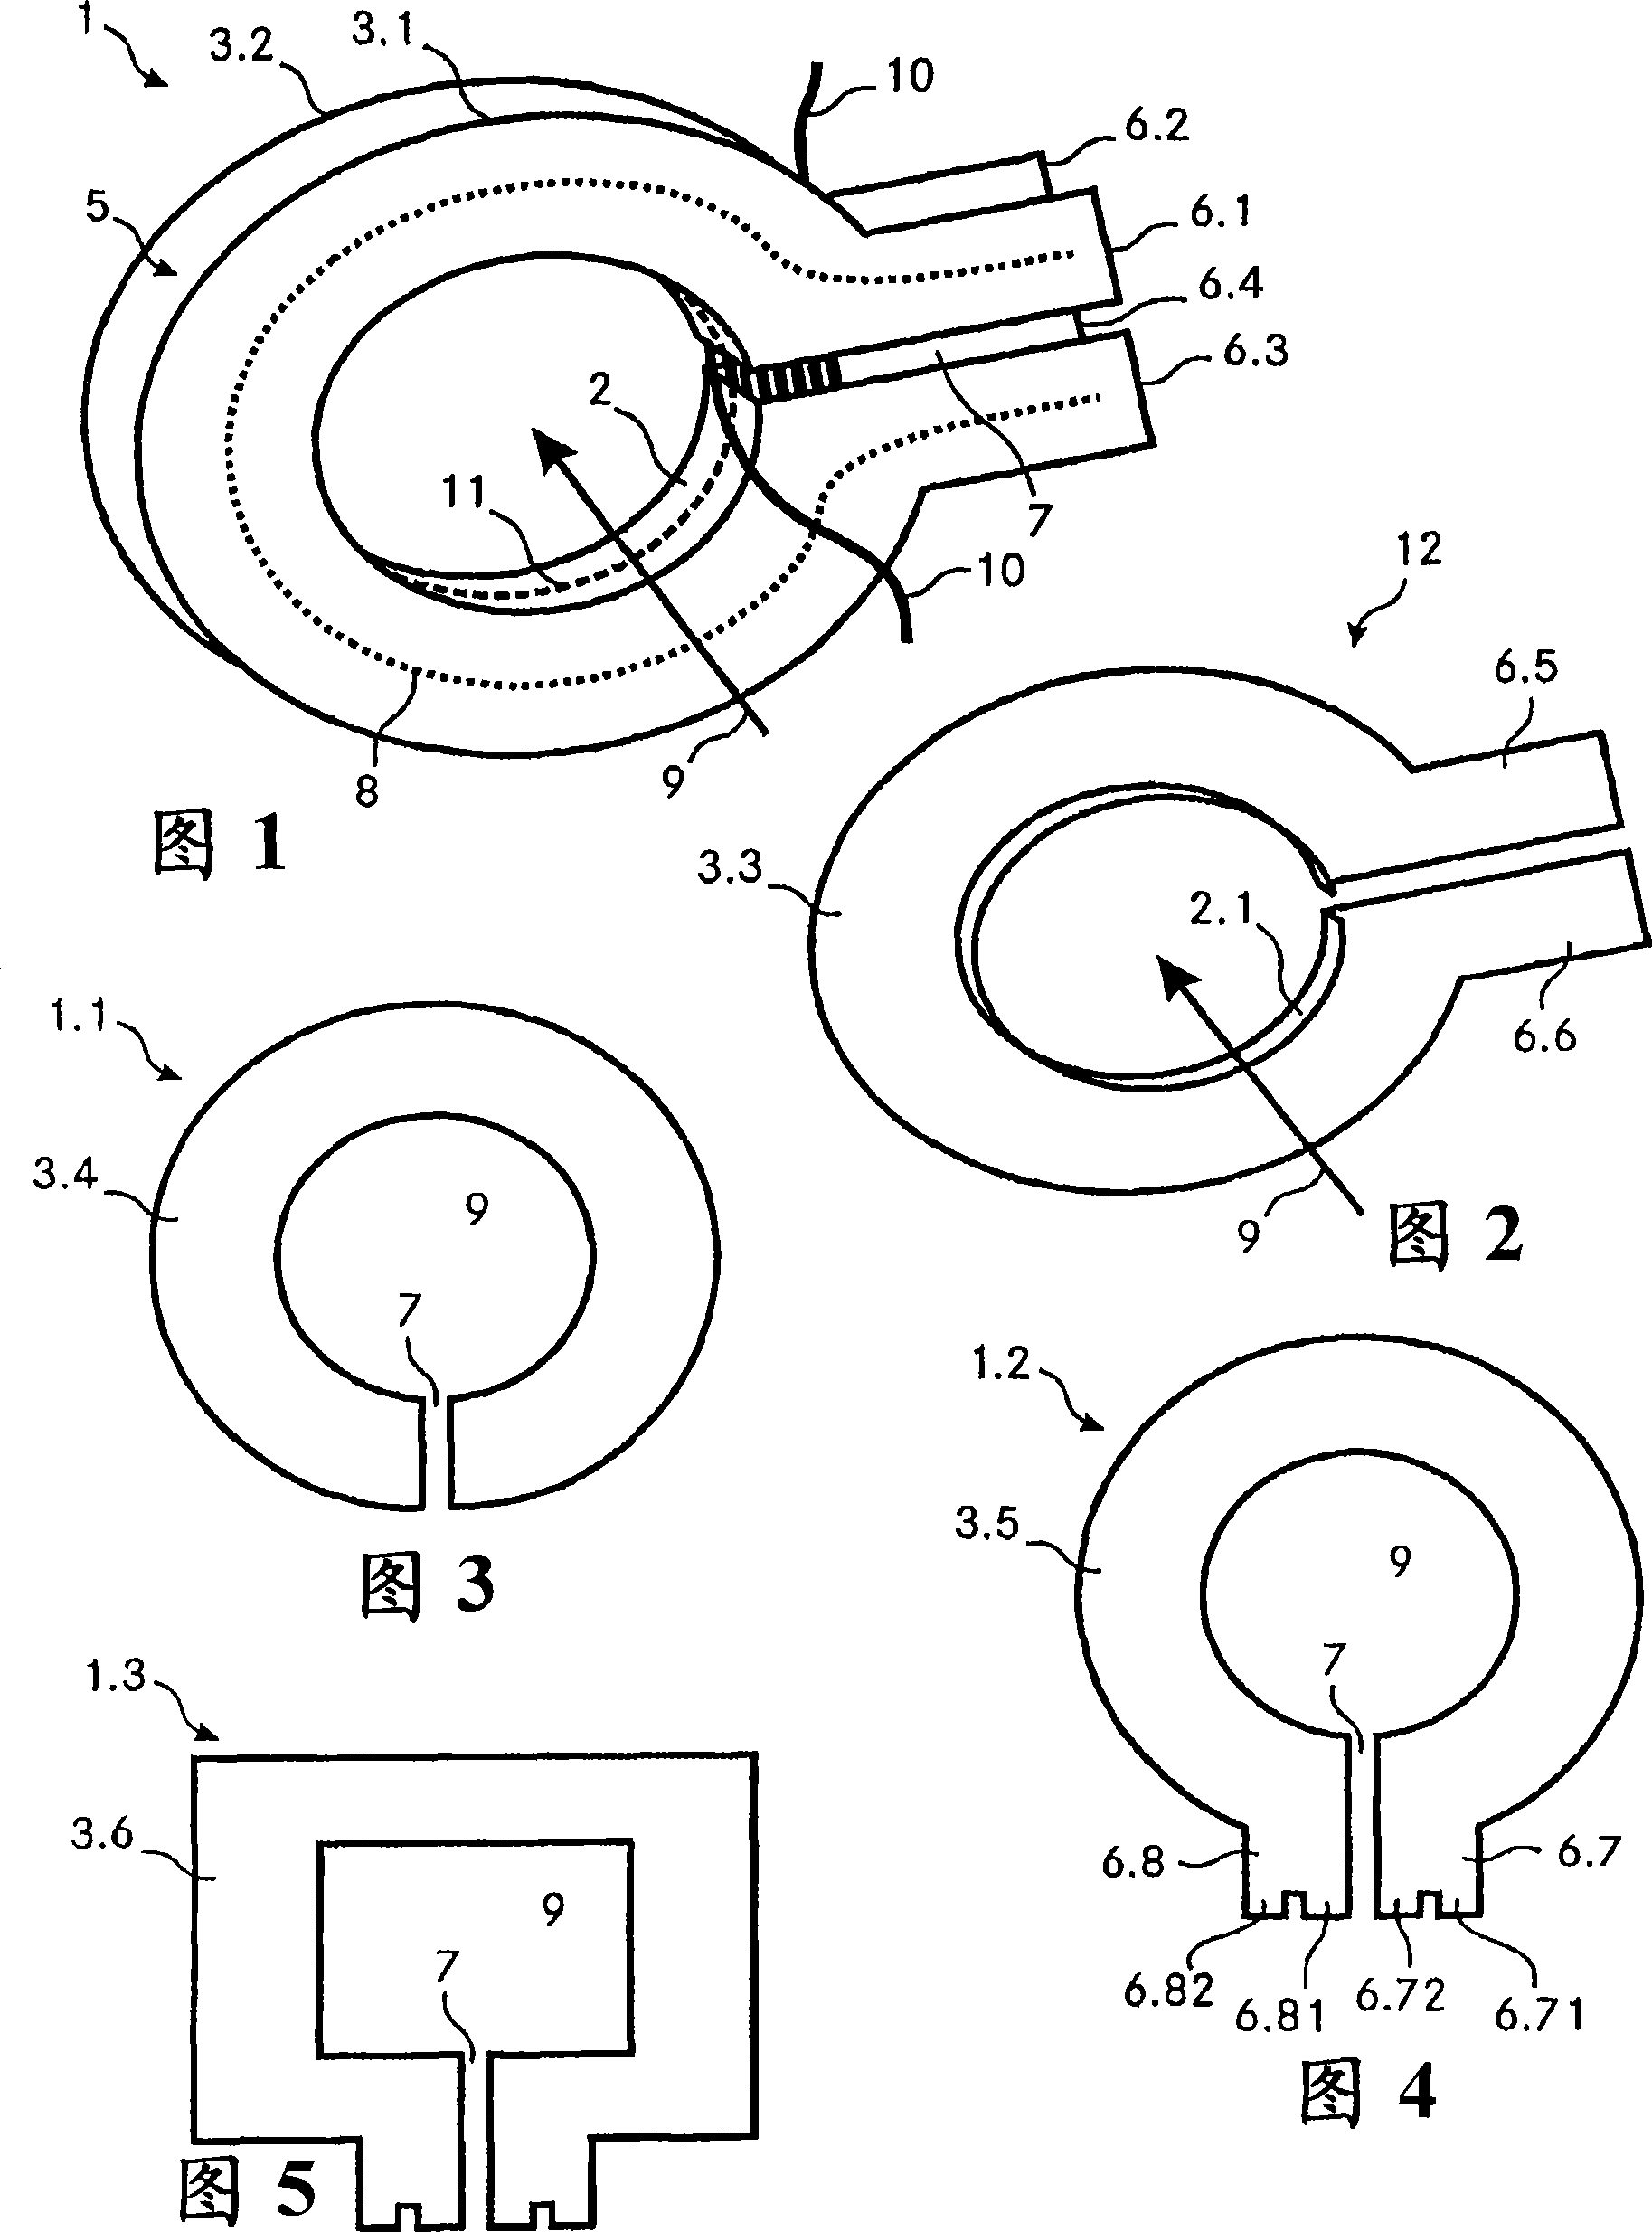 Coil tube for forming an inductive element